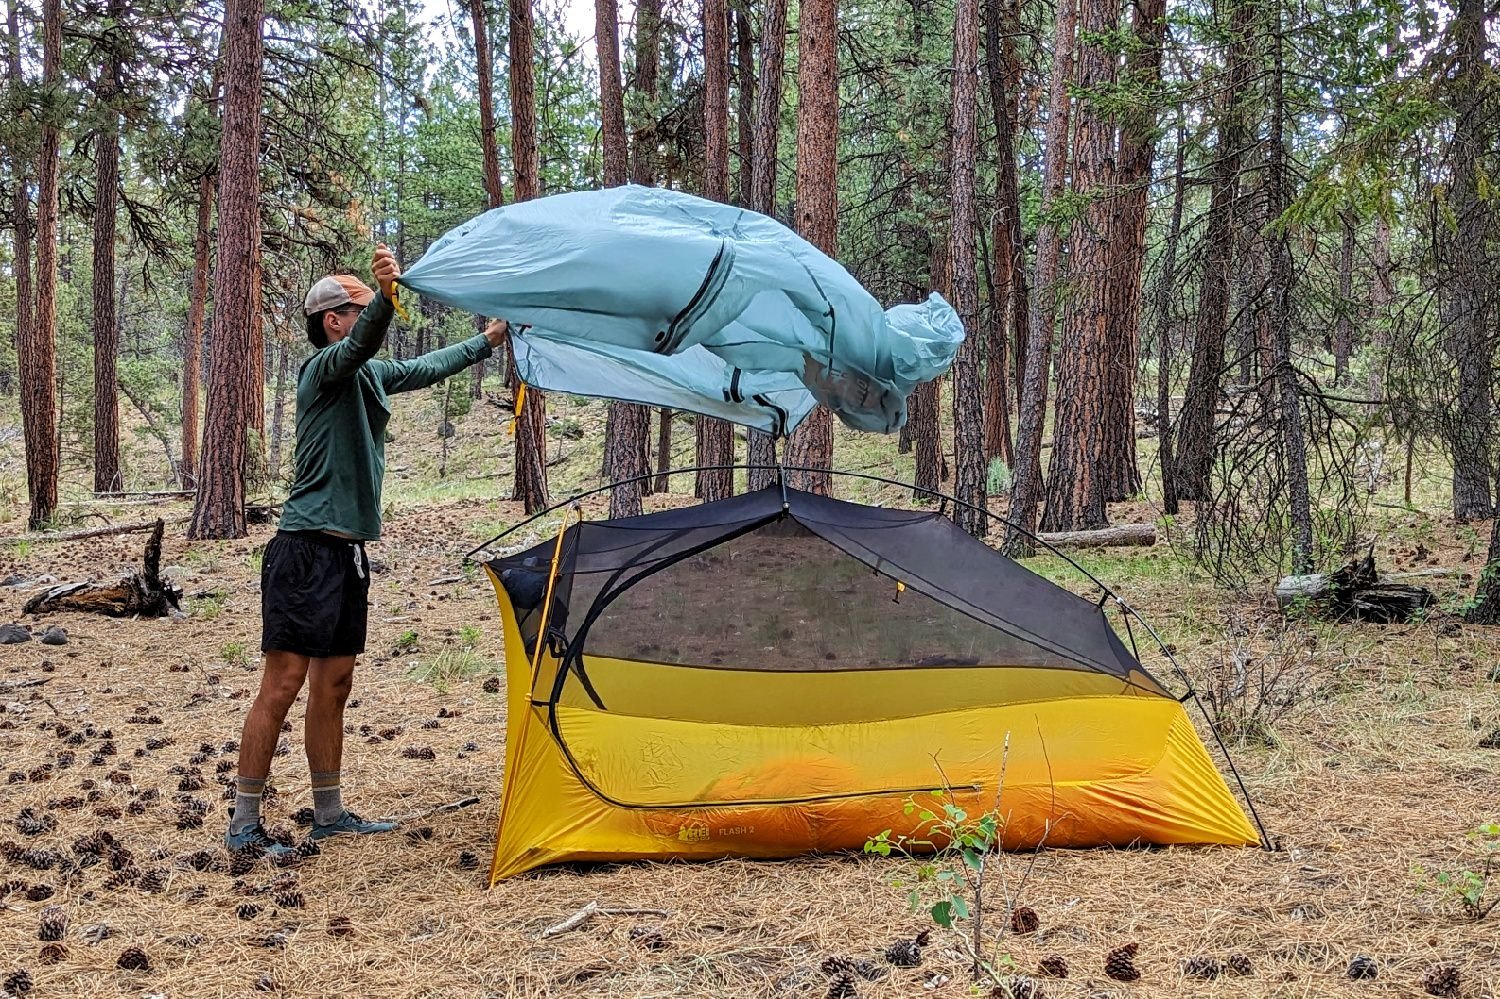 A hiker spreading the rainfly onto the REI Flash 2 Tent in a forested campsite